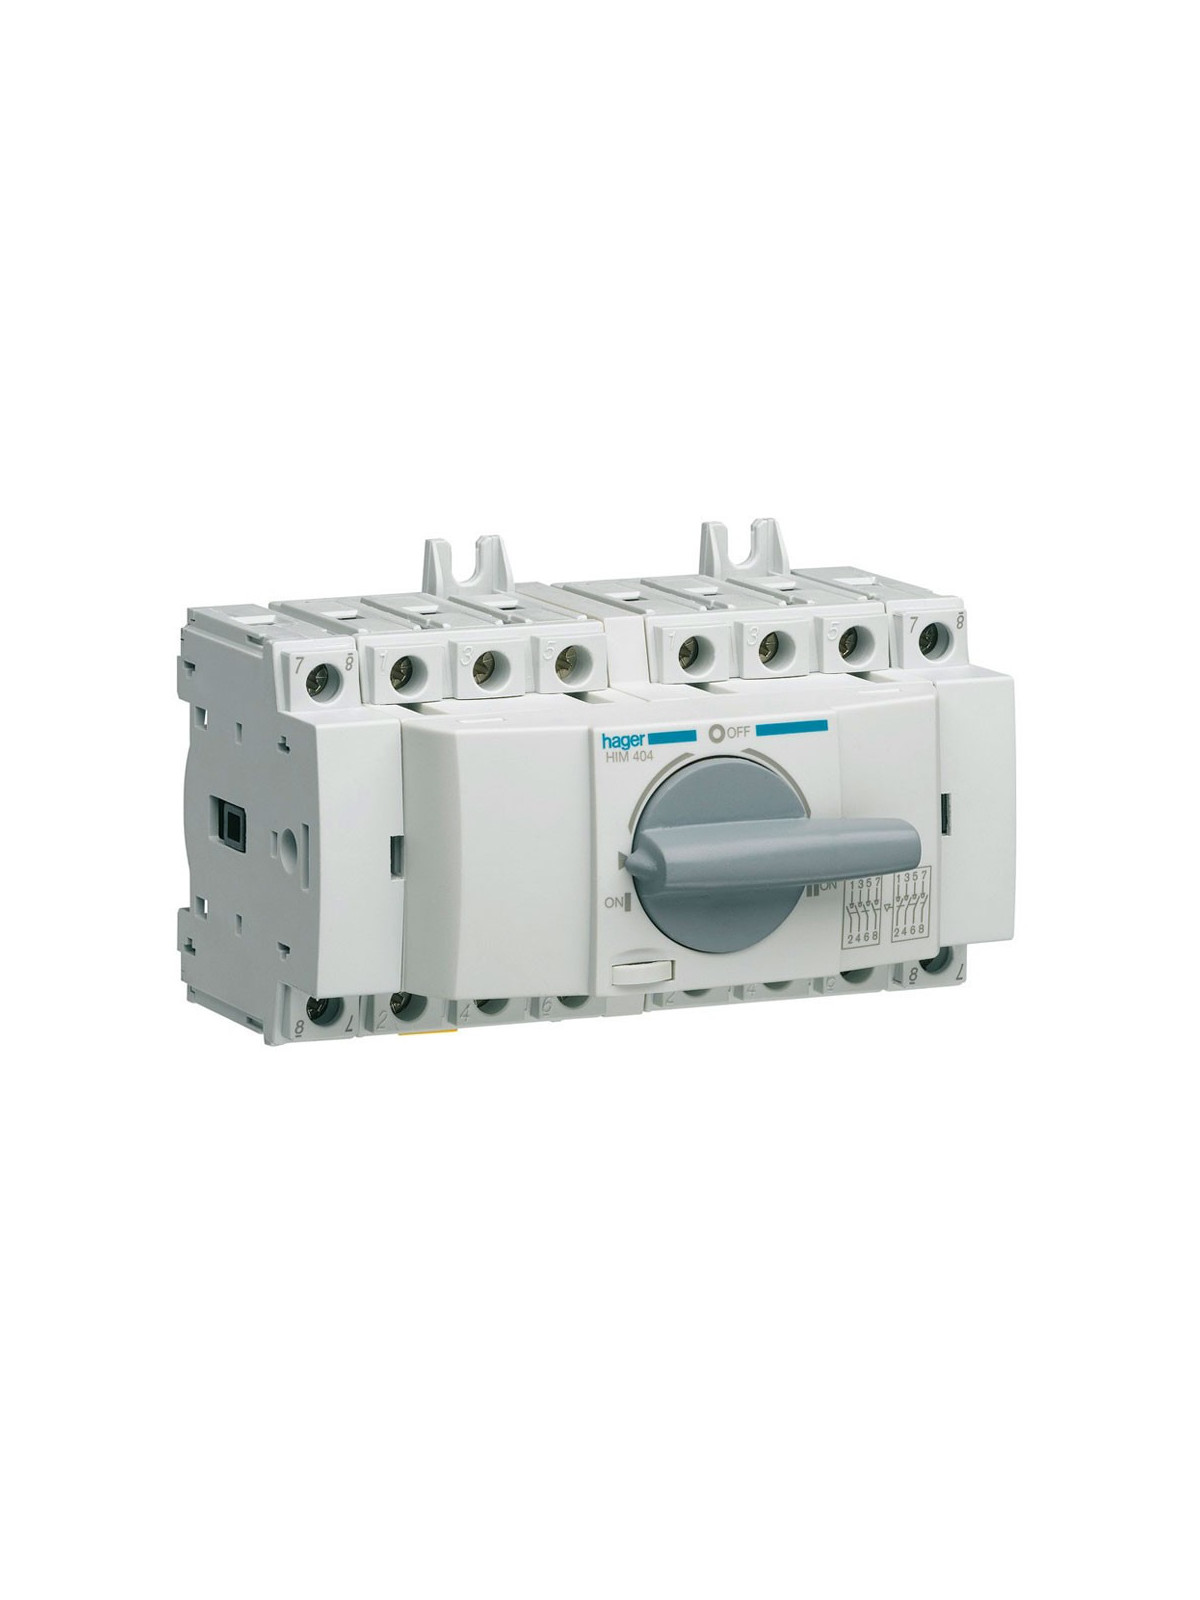 Modular 4-pole 40A changeover switch